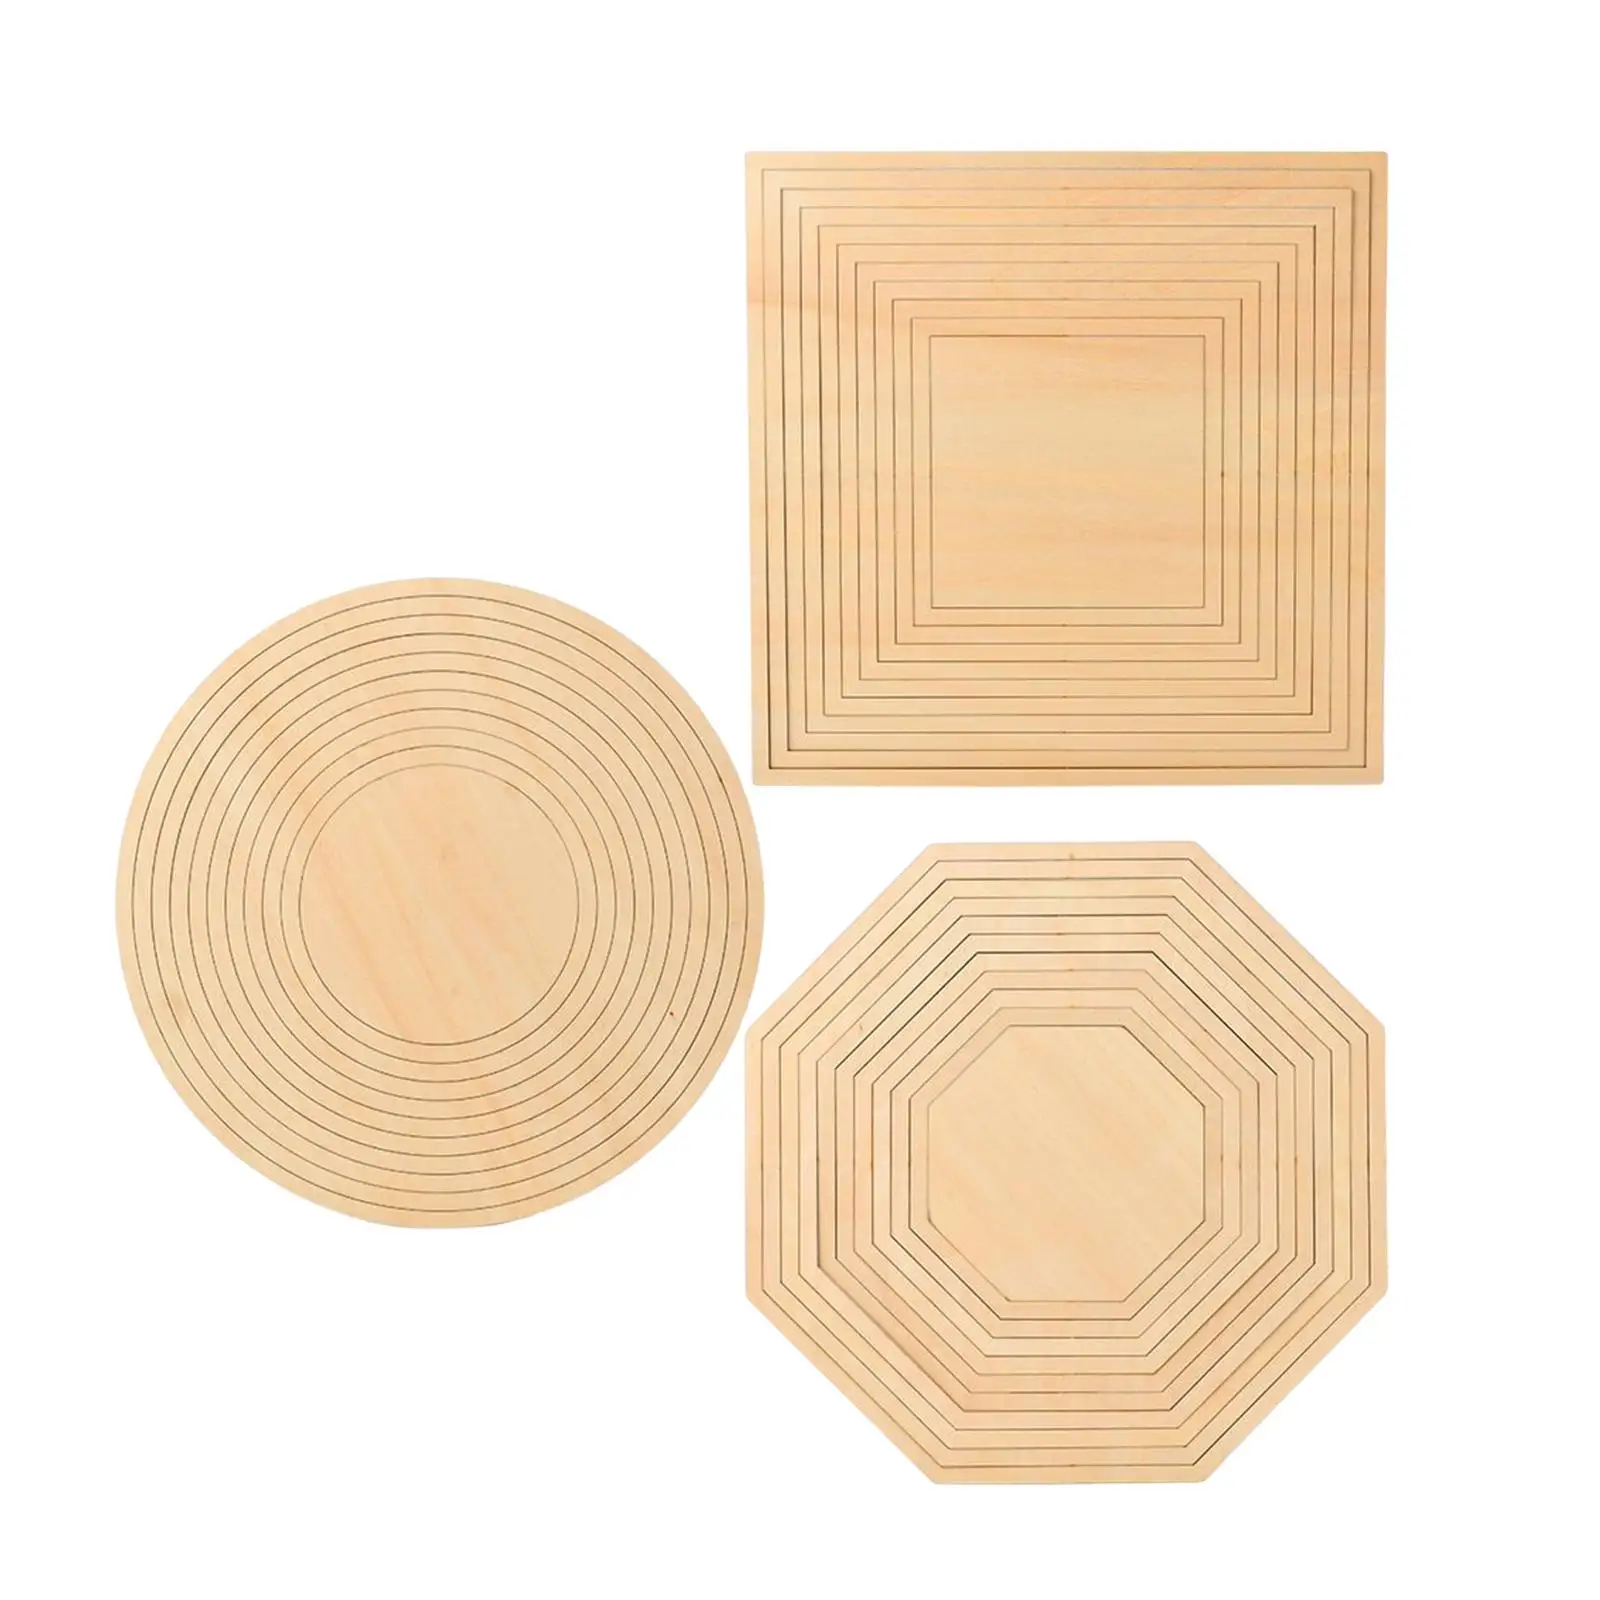 Geometric Figure Rail Set Clay Tools Cutter Accessories Plate for Molding Ceramic